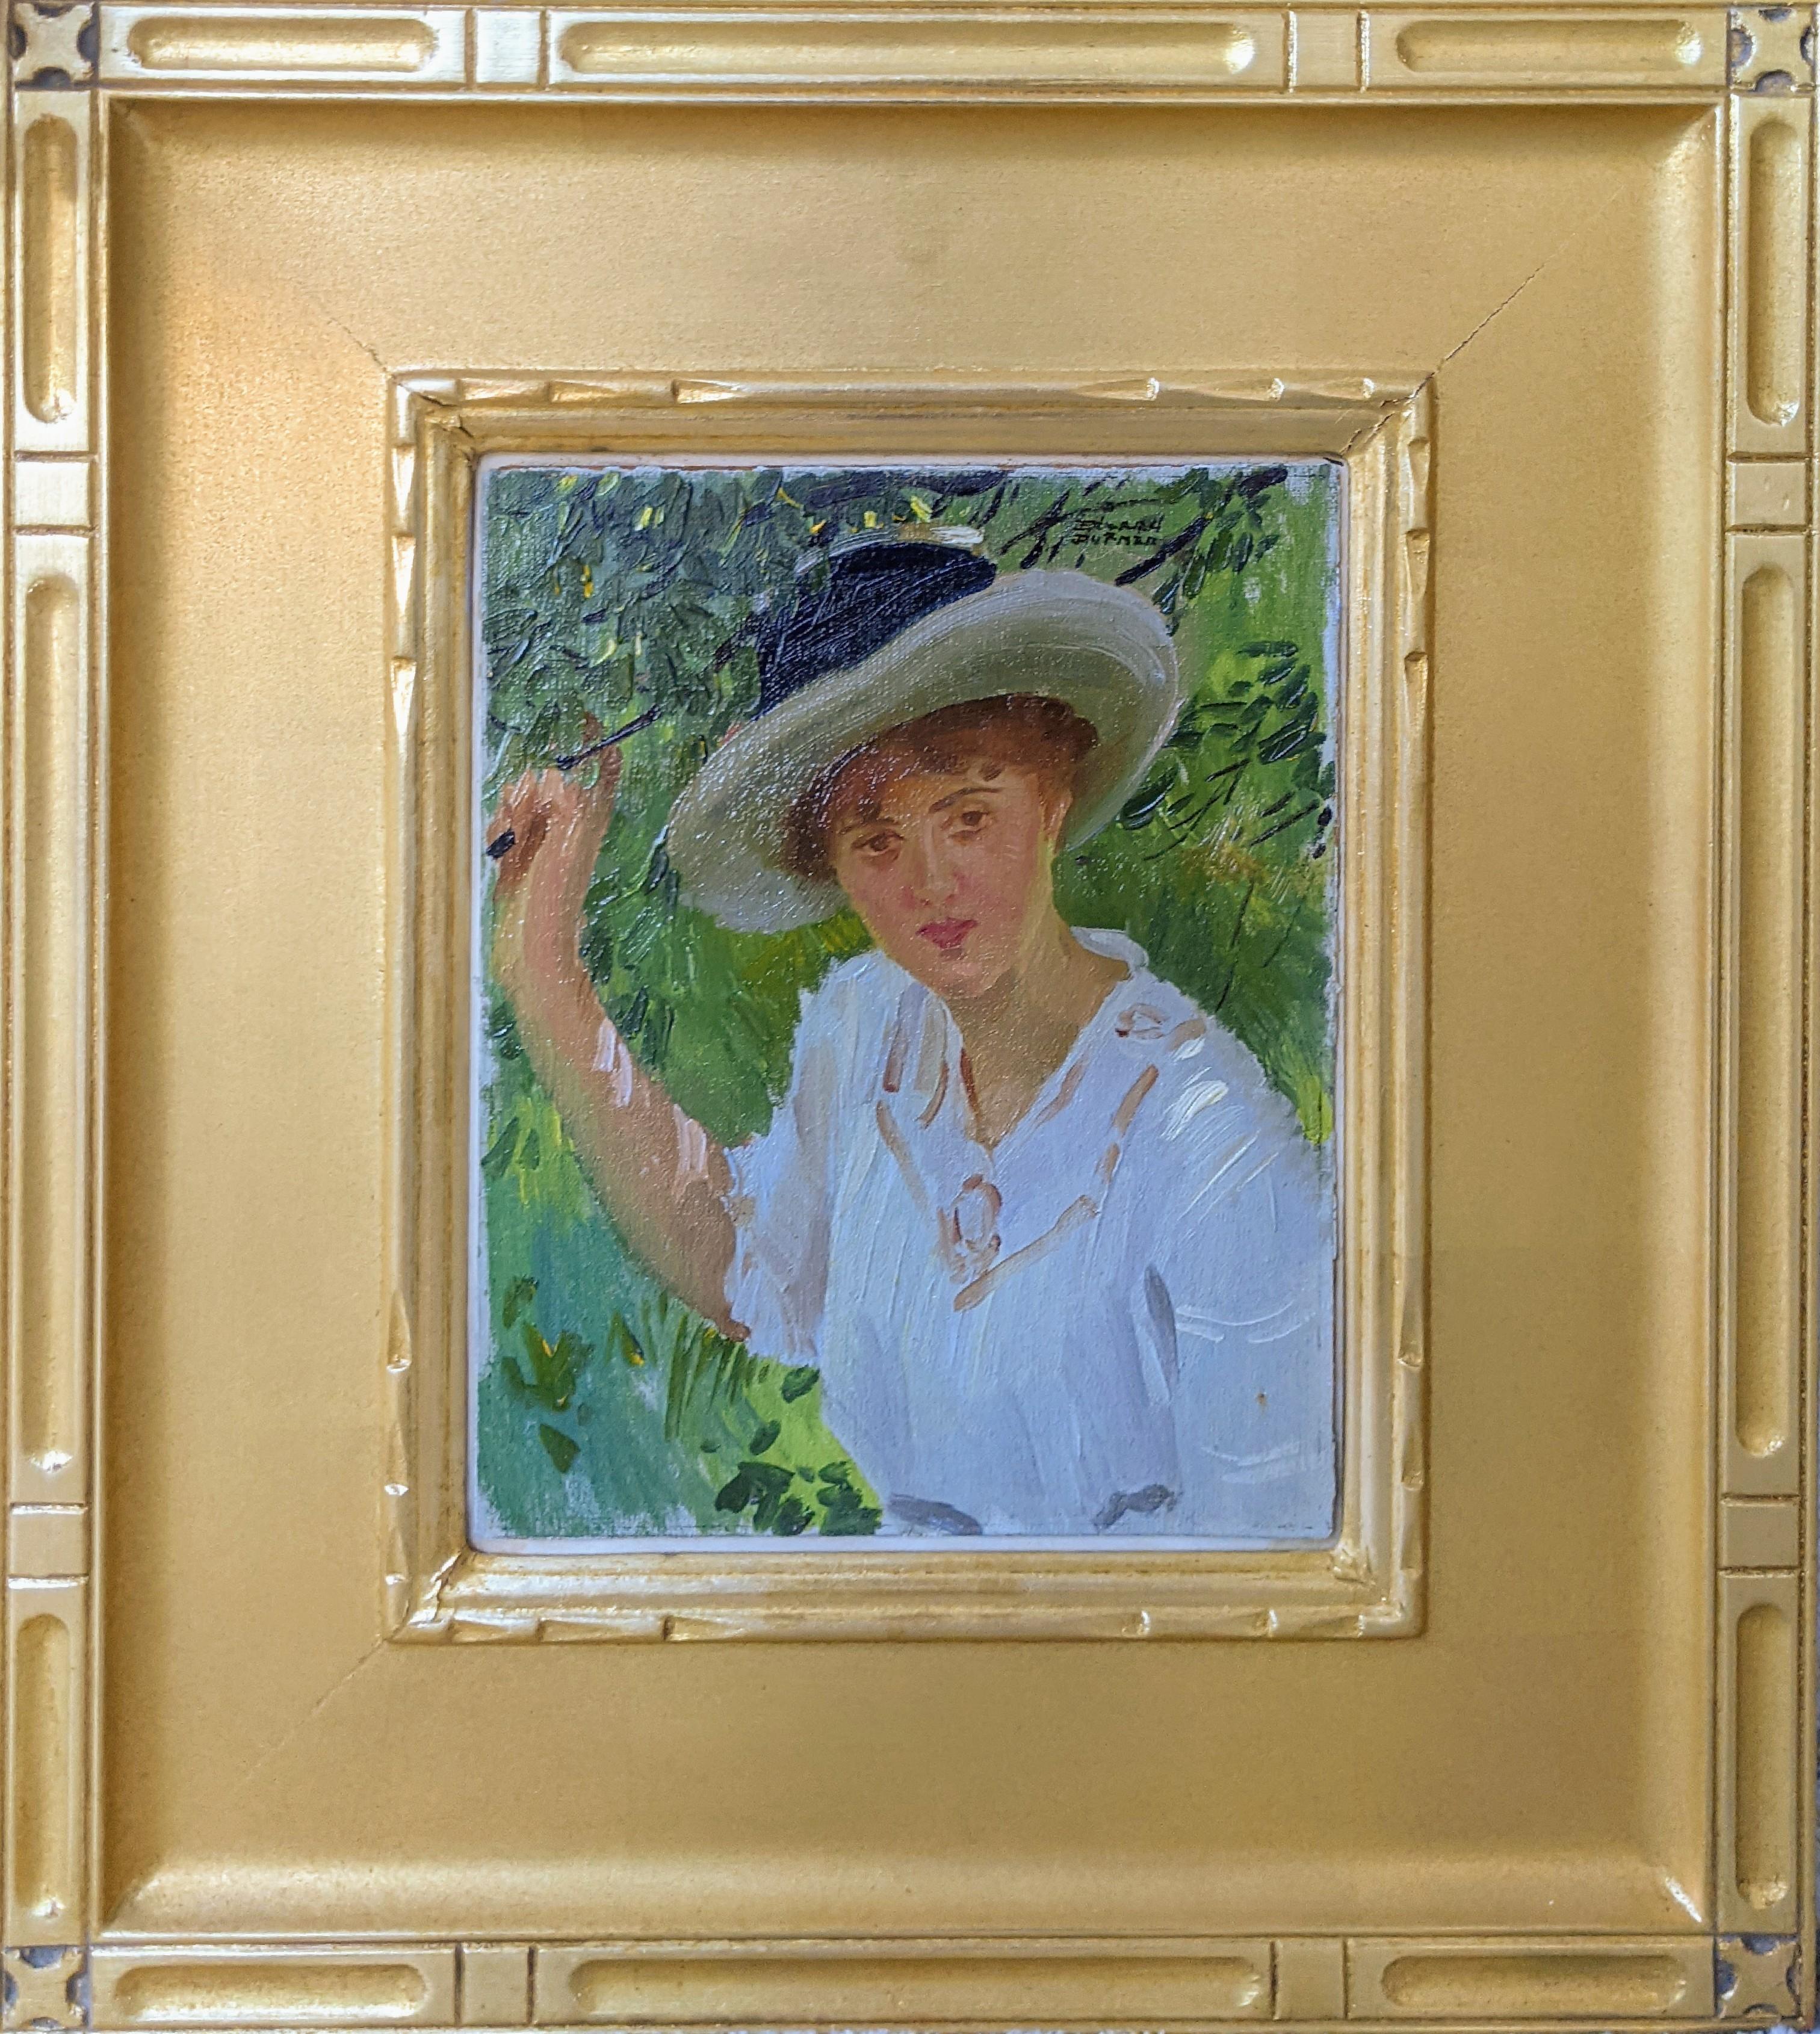 « Sunlight and Shade », Edward Dufner, Lady with a Hat, Impressionnisme américain en vente 1